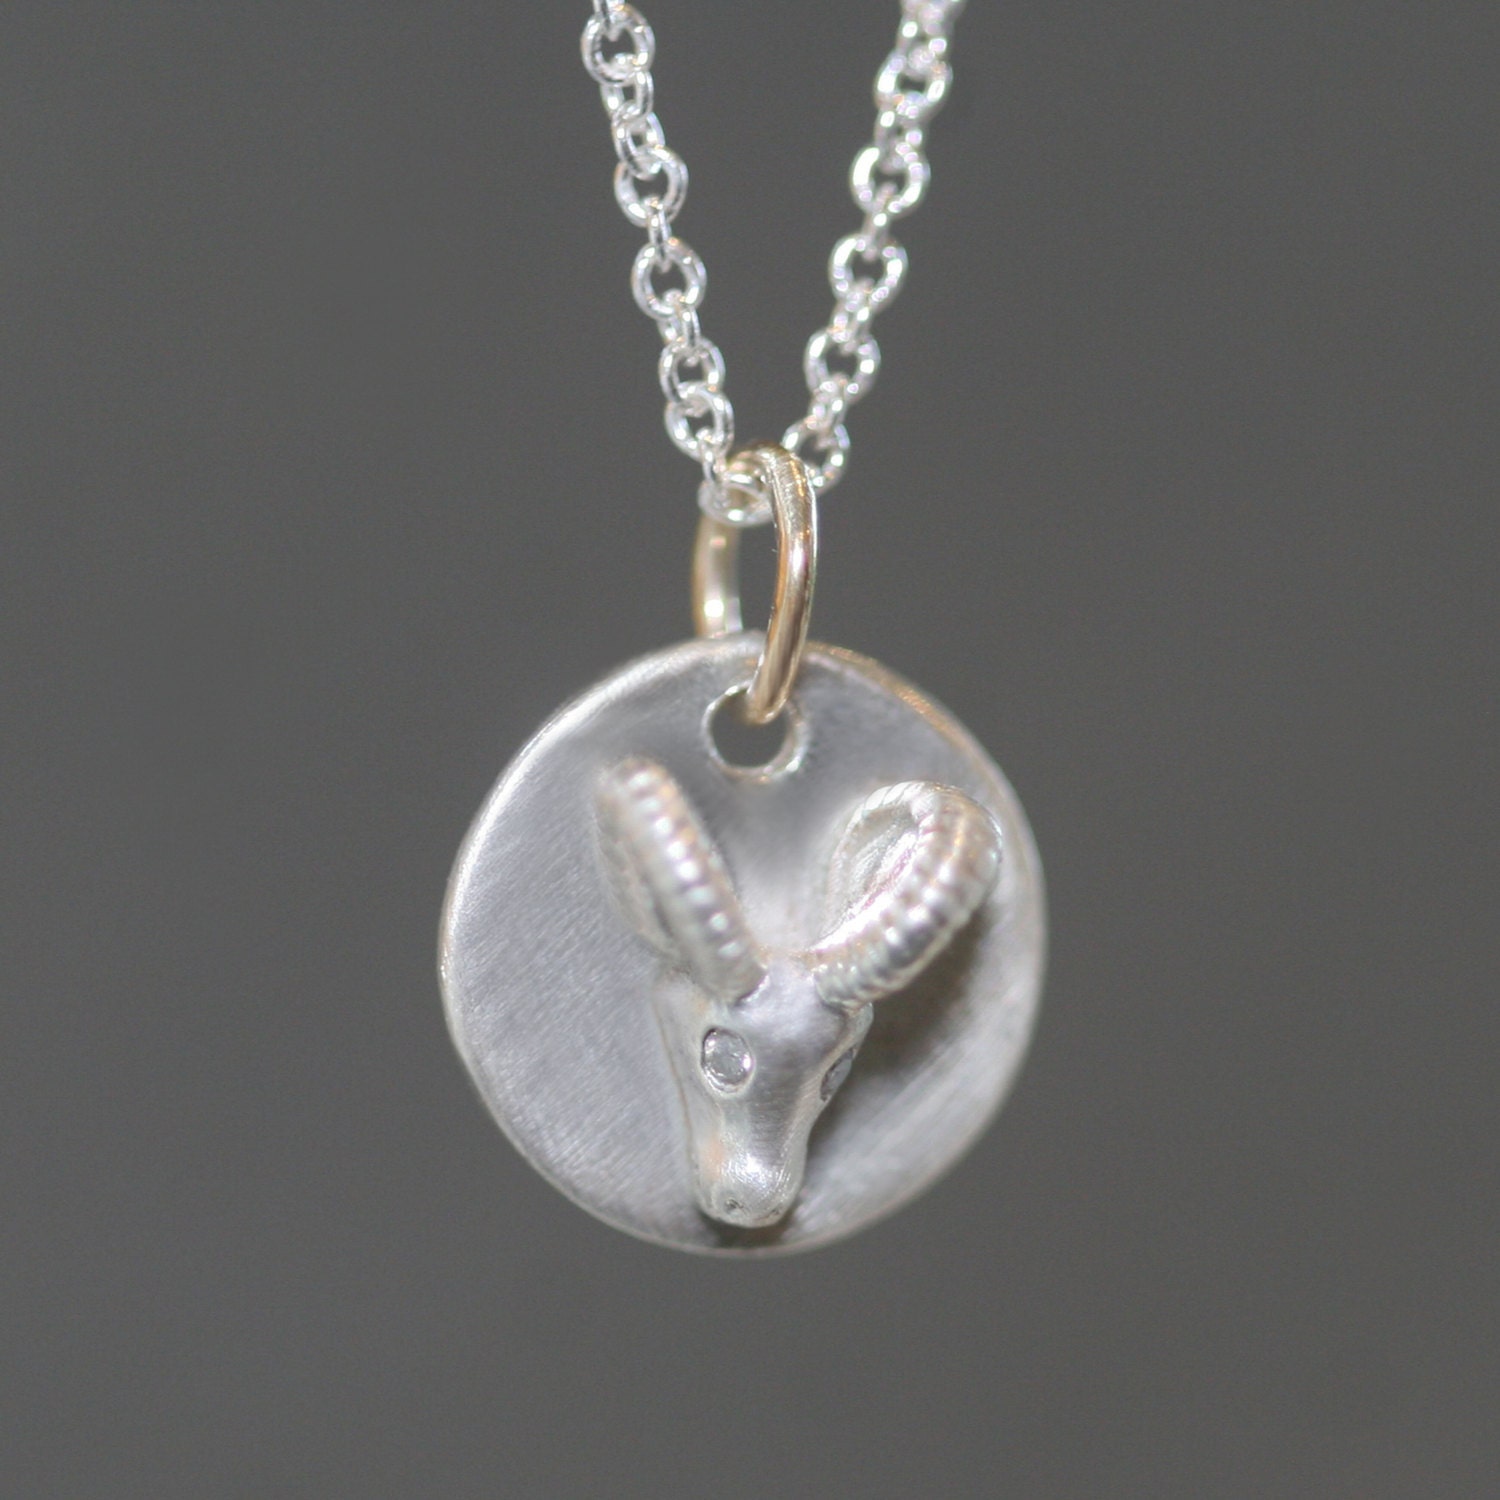 Ram Disk Necklace in Sterling Silver With Diamonds